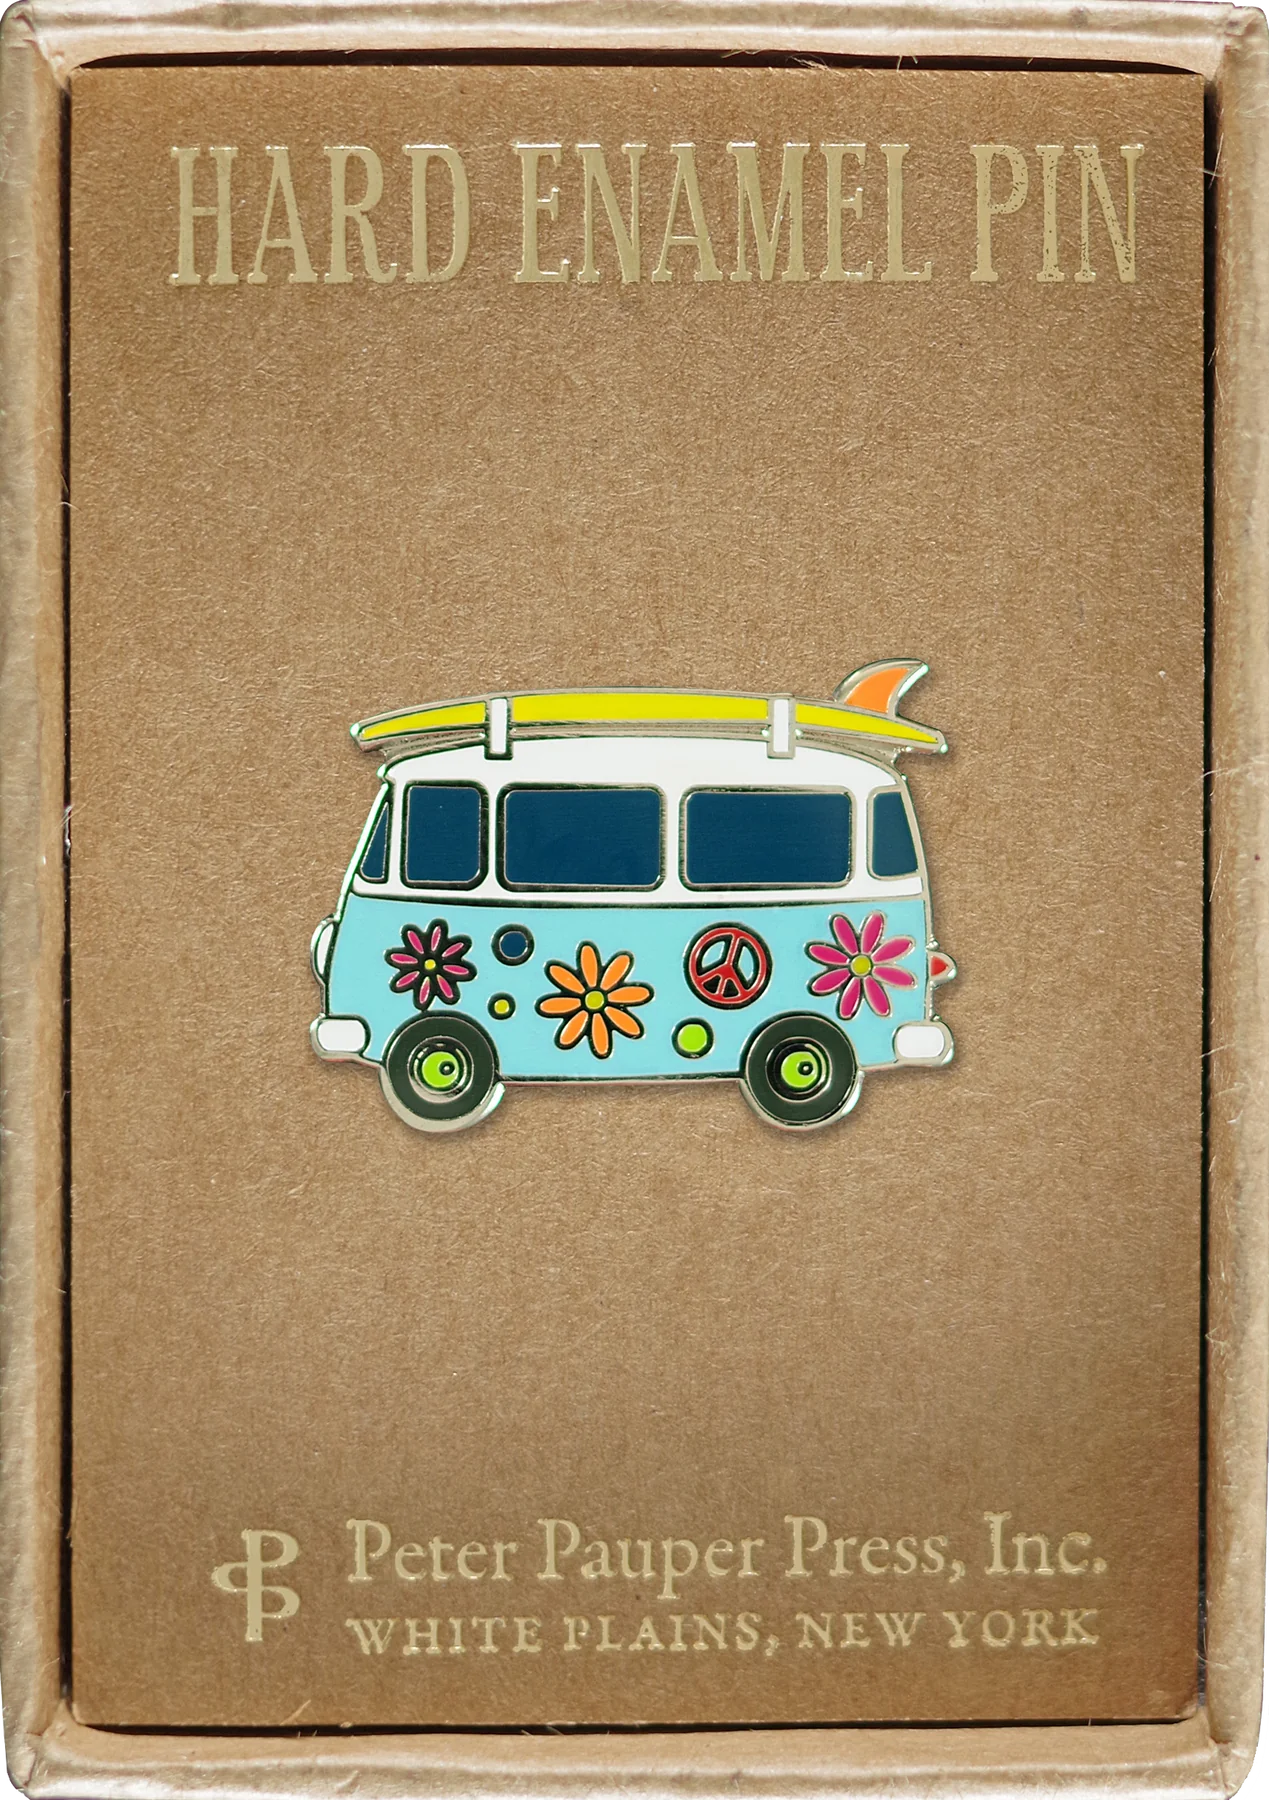 light blue and white vintage bus with multi-coloured flowers and peace signs all over it with a green and orange surf board on the roof attached to a box that says hard enamel pin